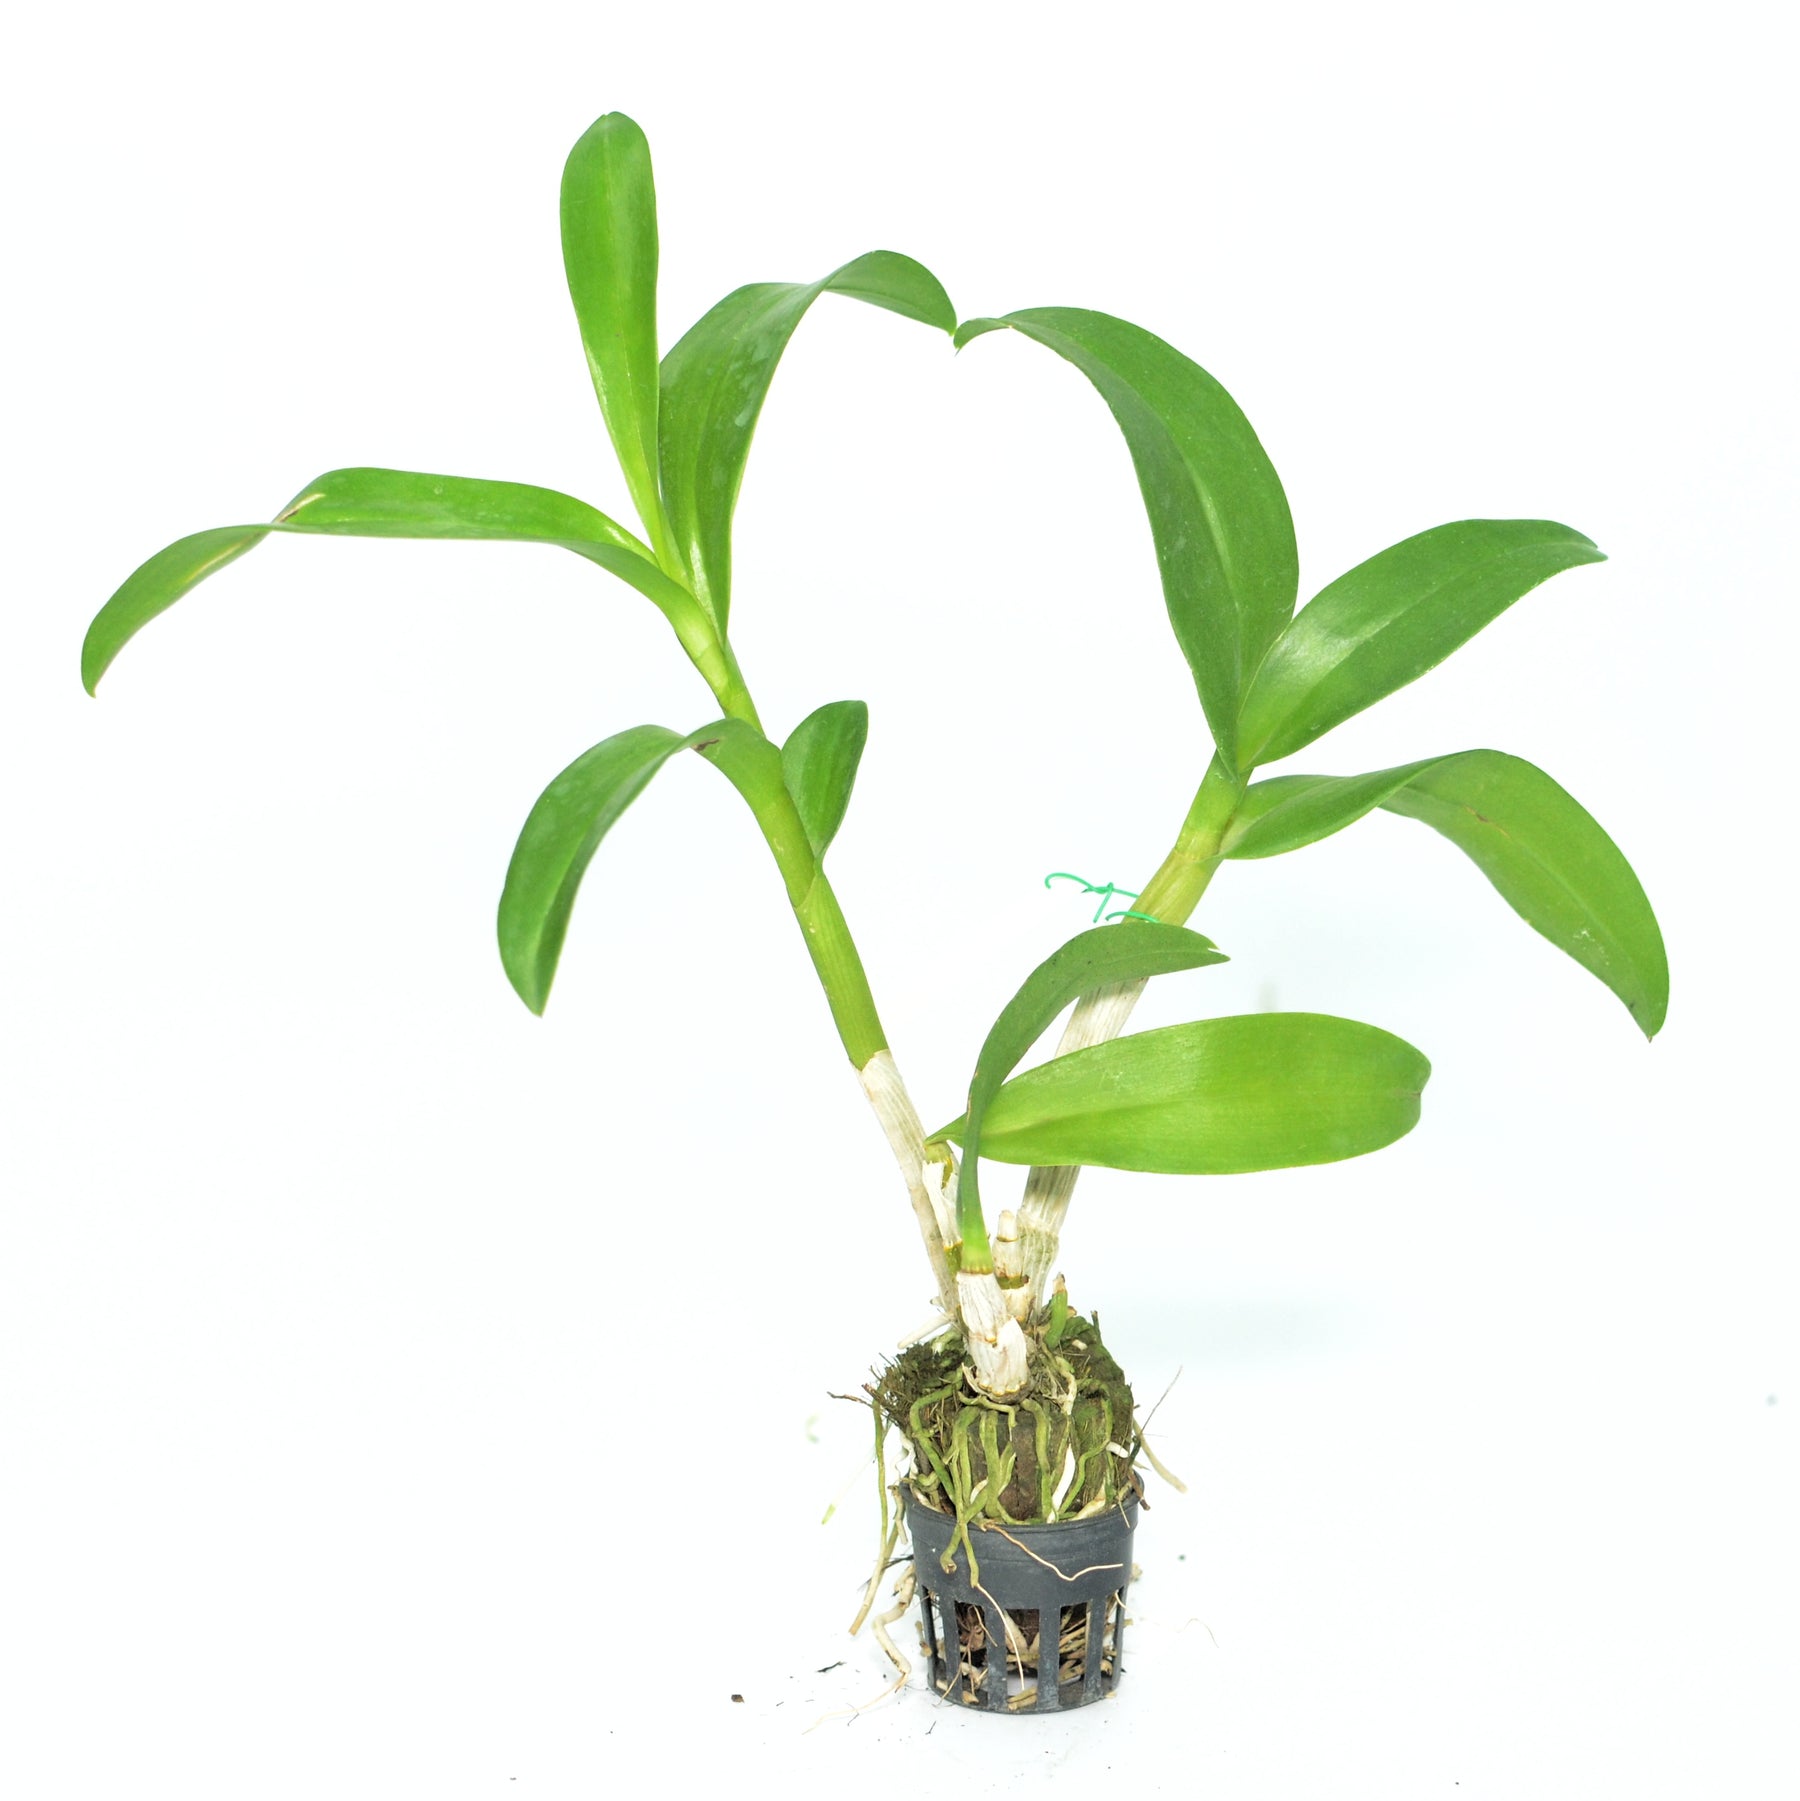 Dendrobium Margarita Green orchid - A fresh burst of green elegance for your floral collection